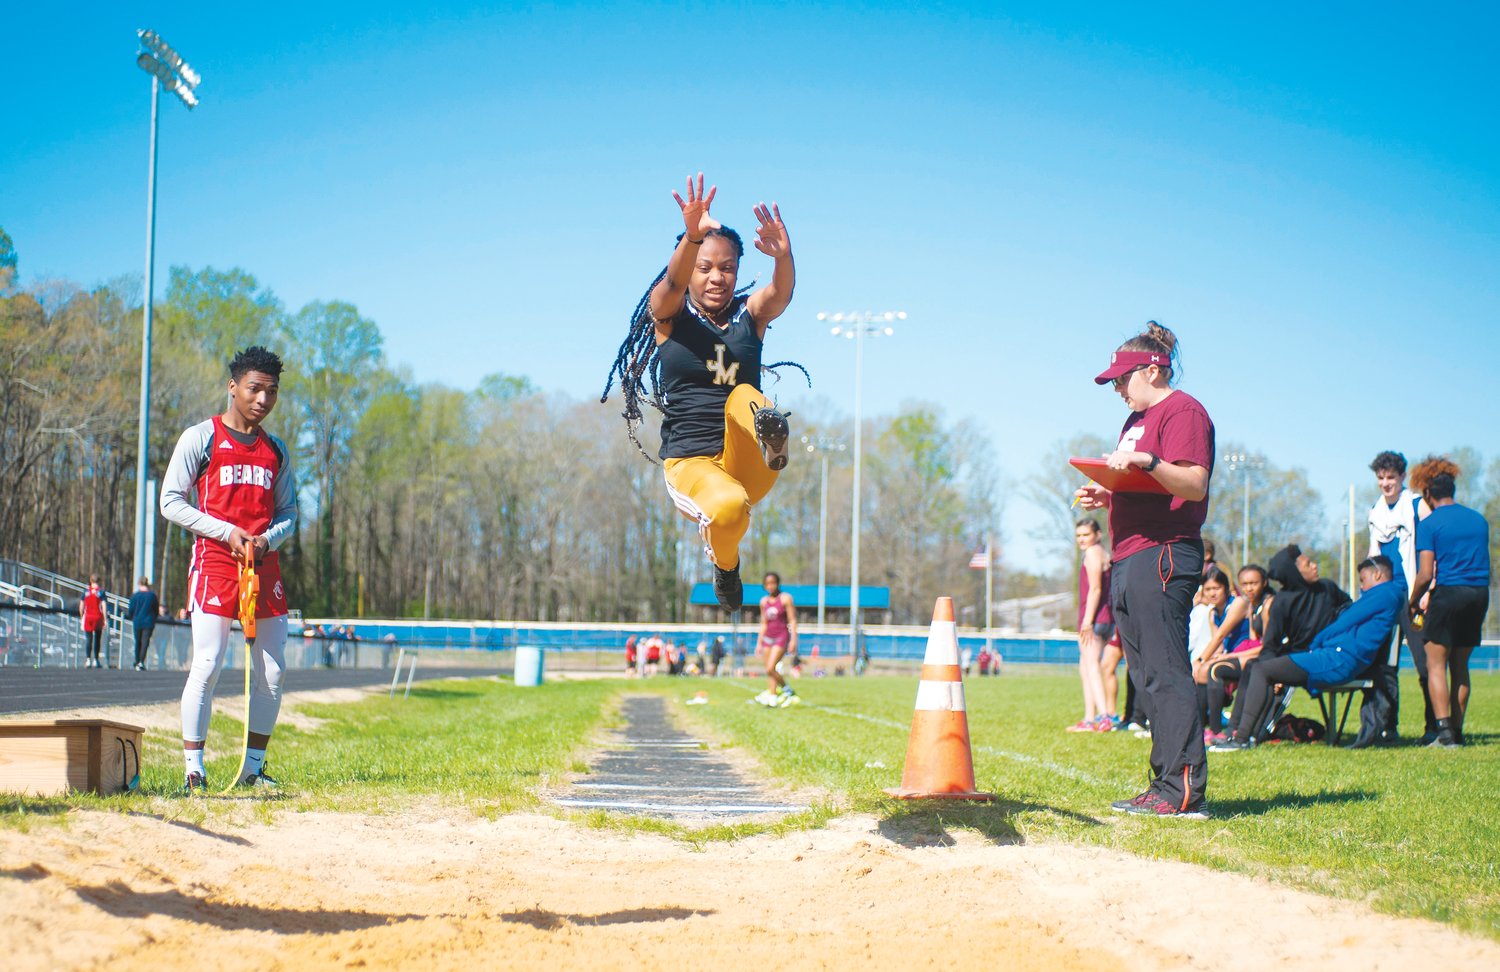 Jordan-Matthews sophomore Cassidy DeShazo competes in the women's long jump event at the Chatham County Invitational last Saturday. DeShazo placed second overall in the event.